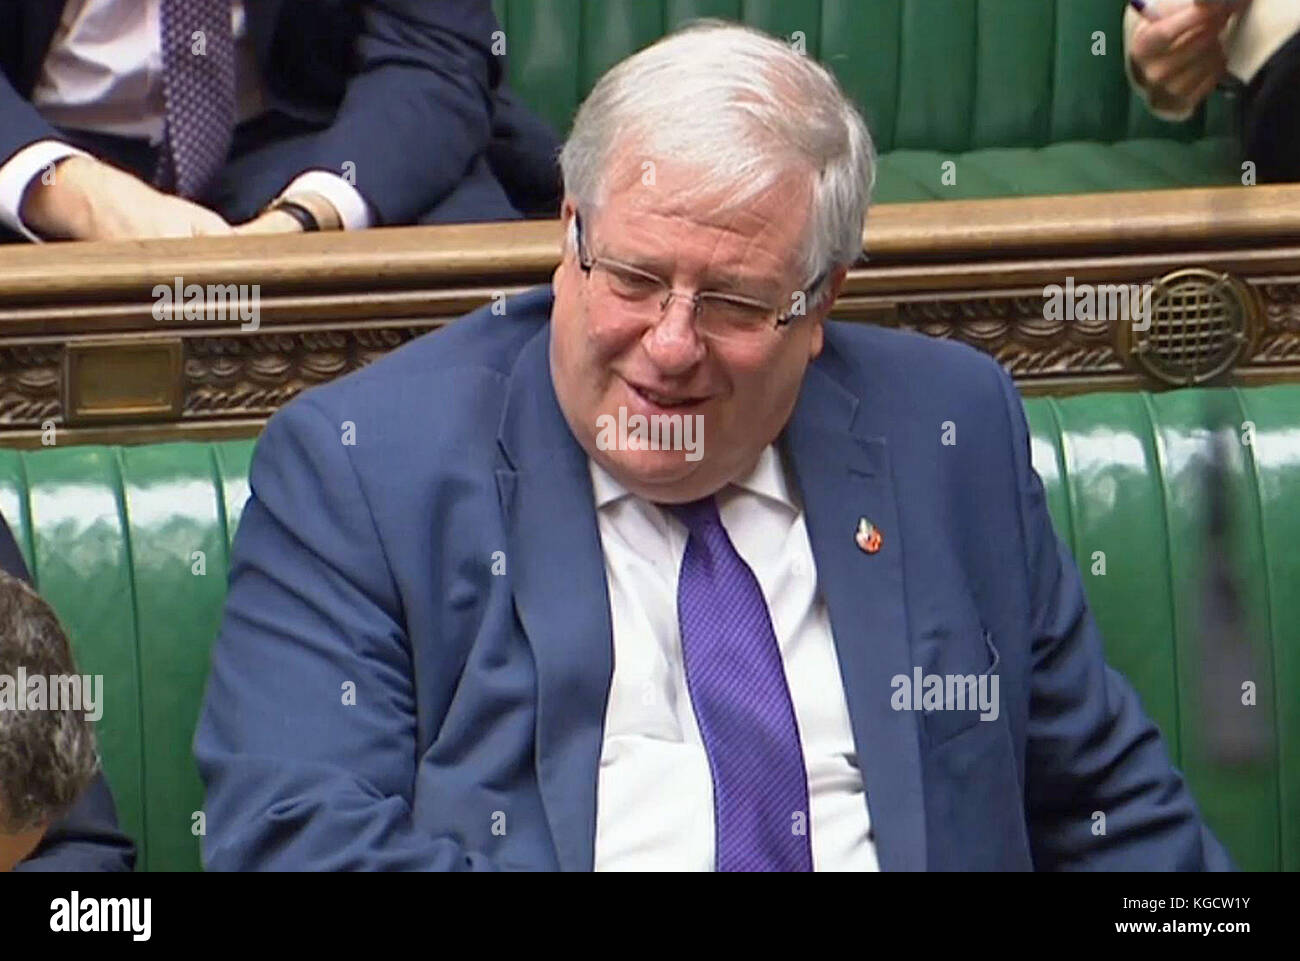 Chancellor of the Duchy of Lancaster, Sir Patrick McLoughlin, looks on as shadow chancellor John McDonnell asks an urgent question in the House of Commons, London, regarding the Paradise Papers leak of secret documents. Stock Photo